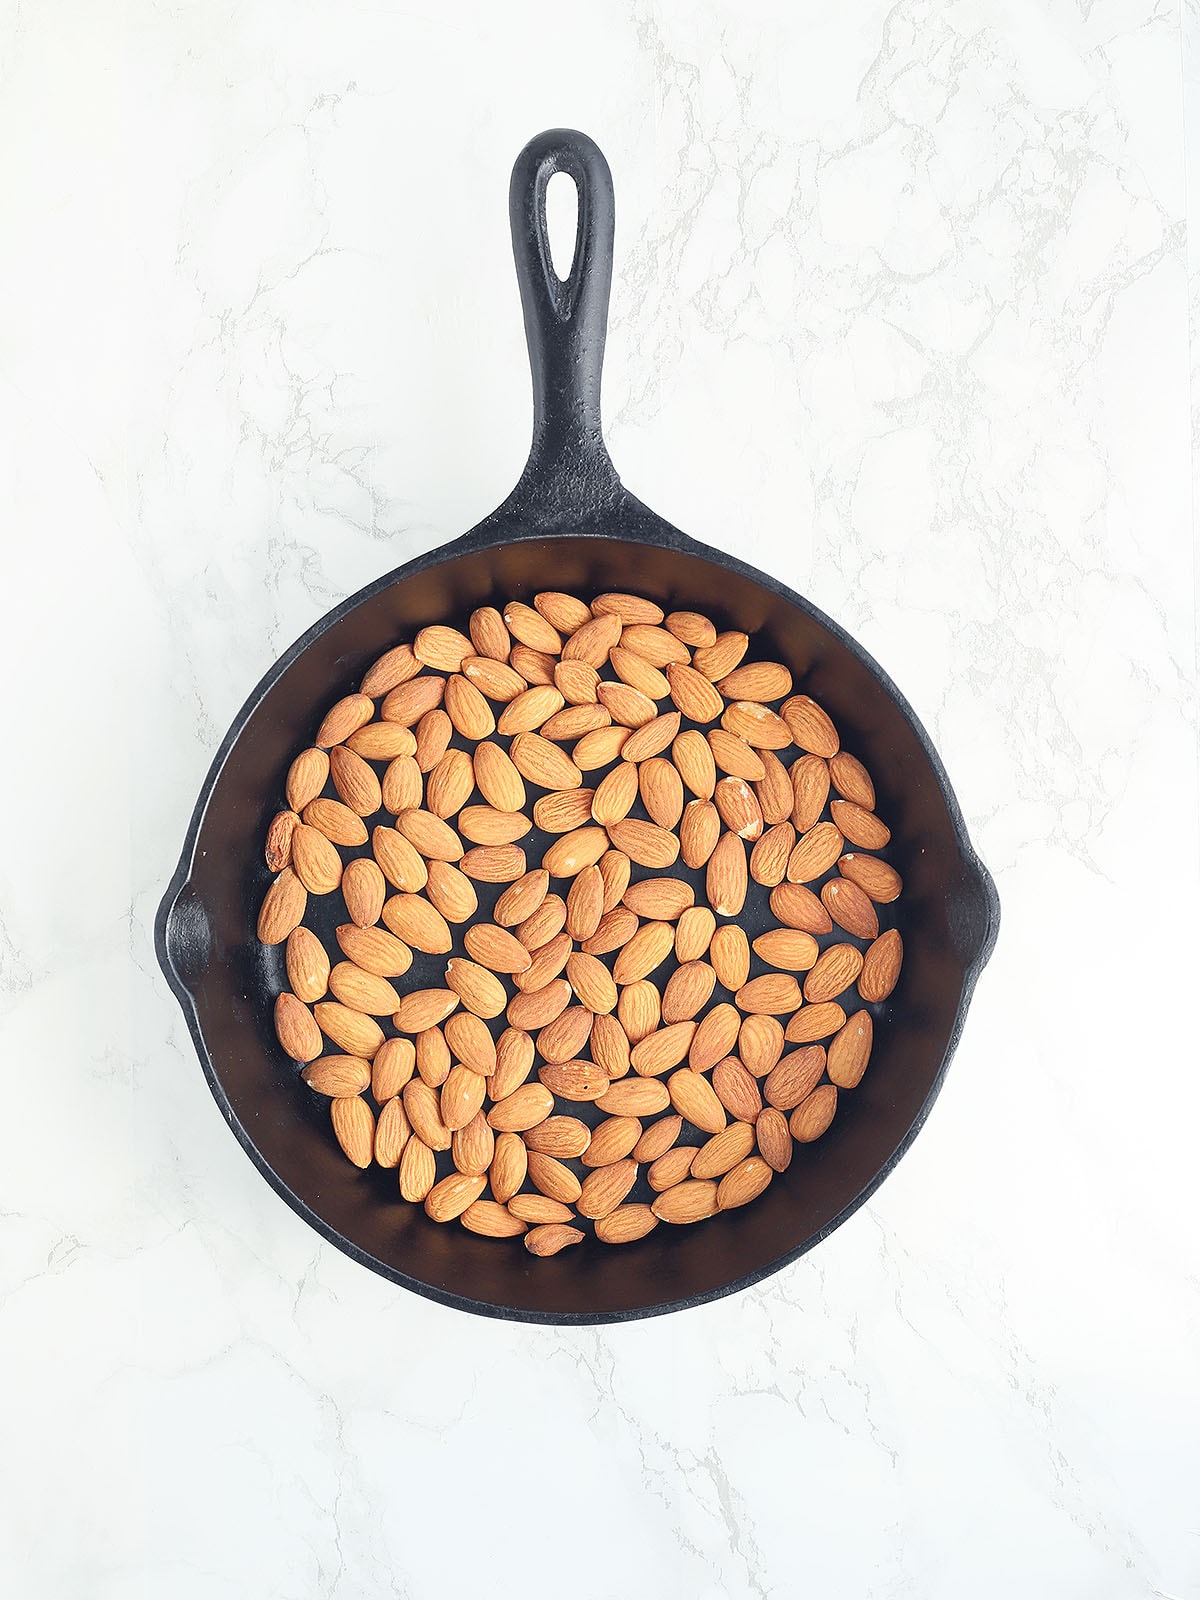 untoasted almonds in a cast iron skillet on a white background